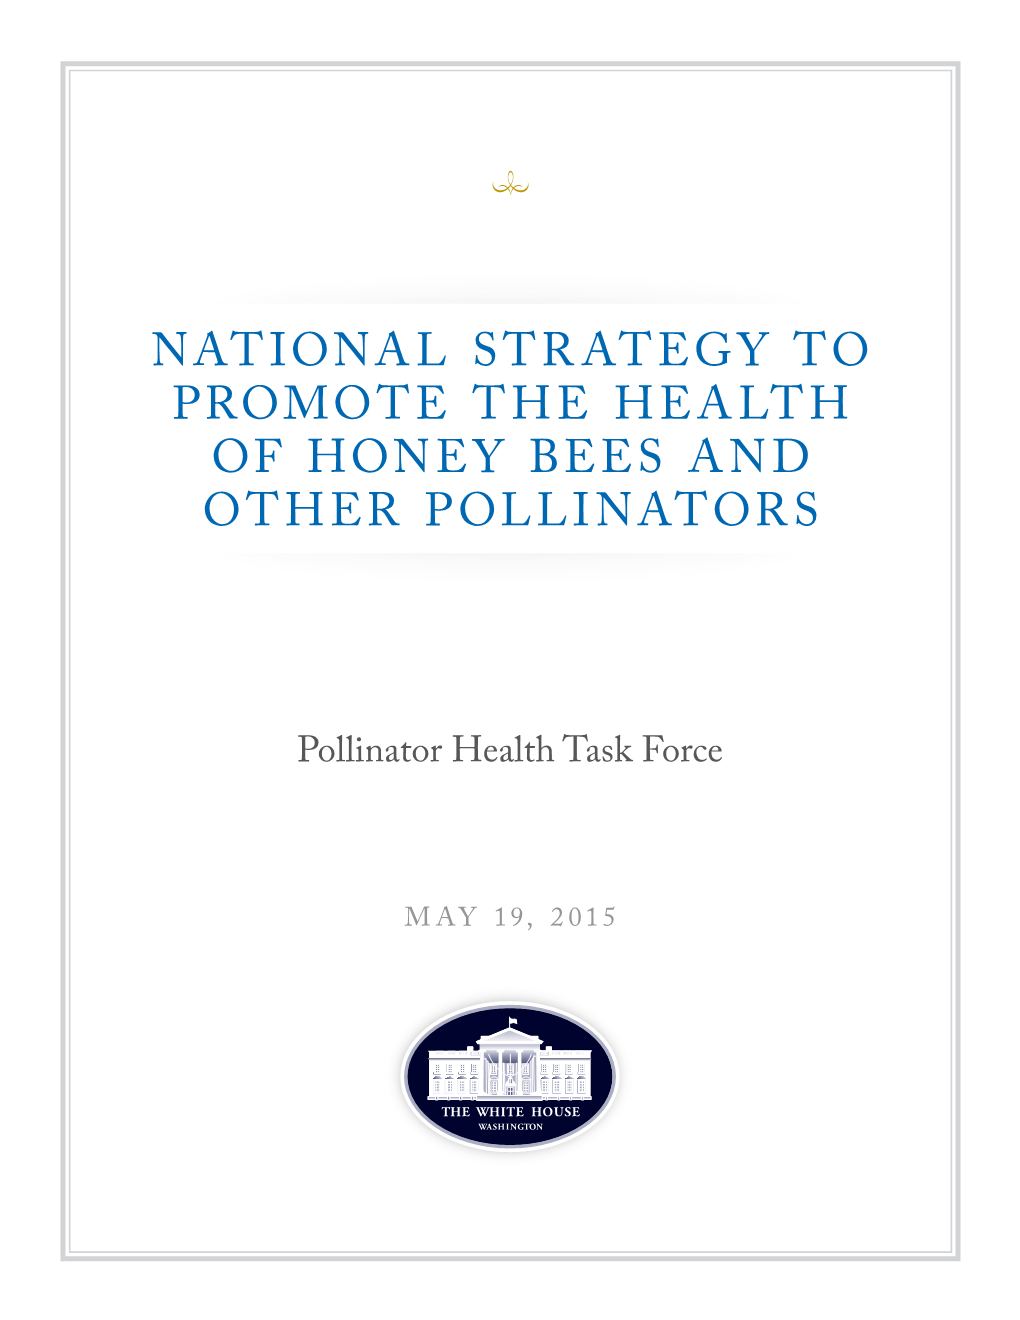 National Strategy to Promote the Health of Honey Bees and Other Pollinators